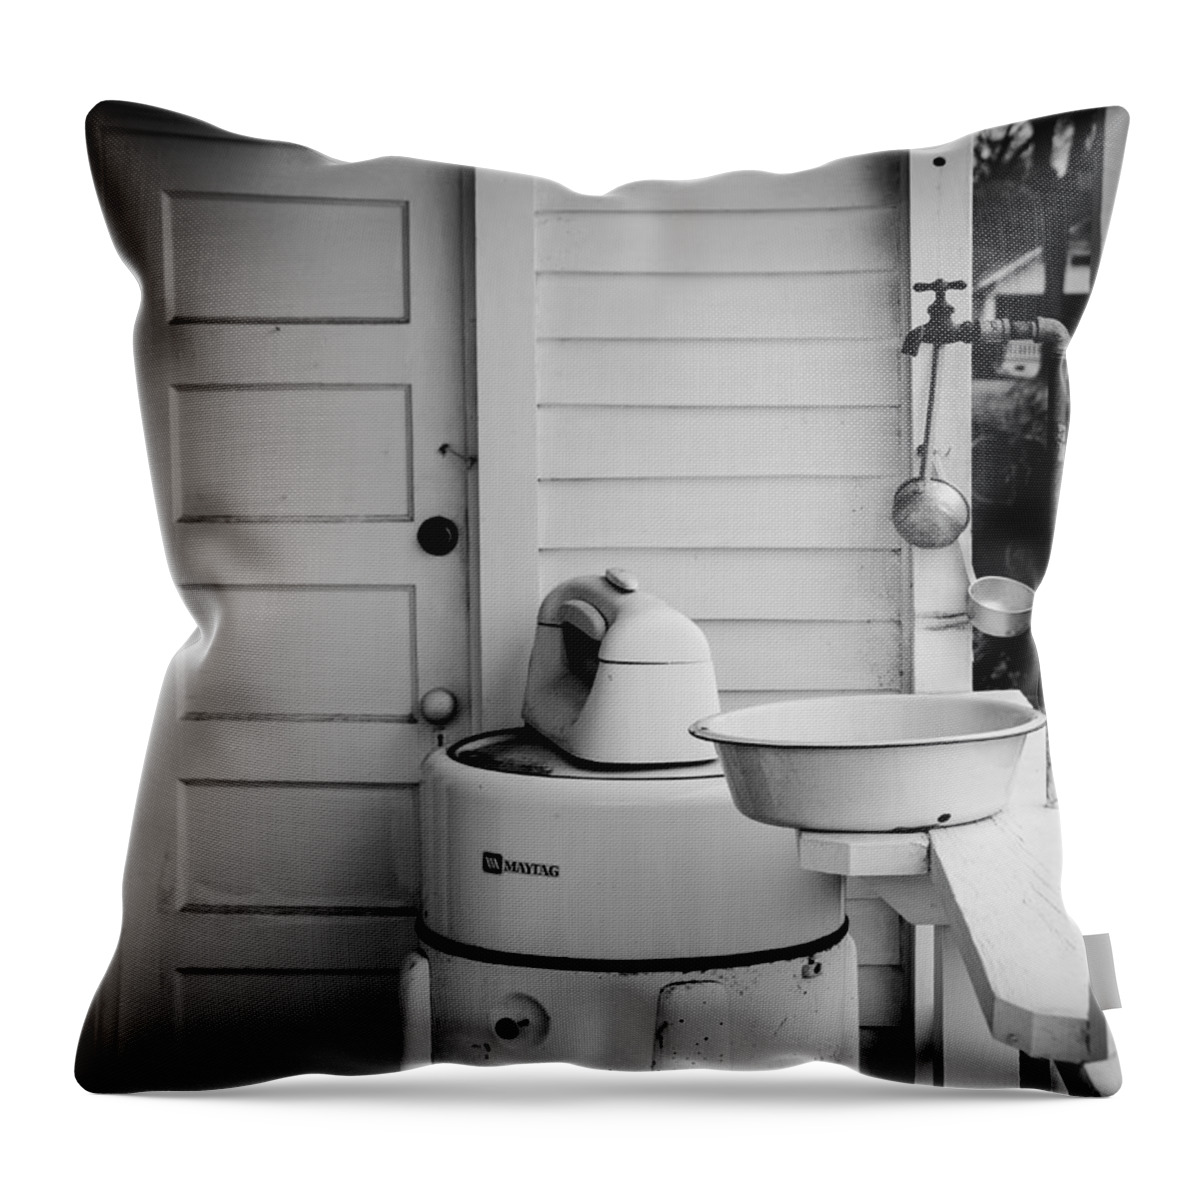  Throw Pillow featuring the photograph Old Maytag Washer by Rodney Lee Williams